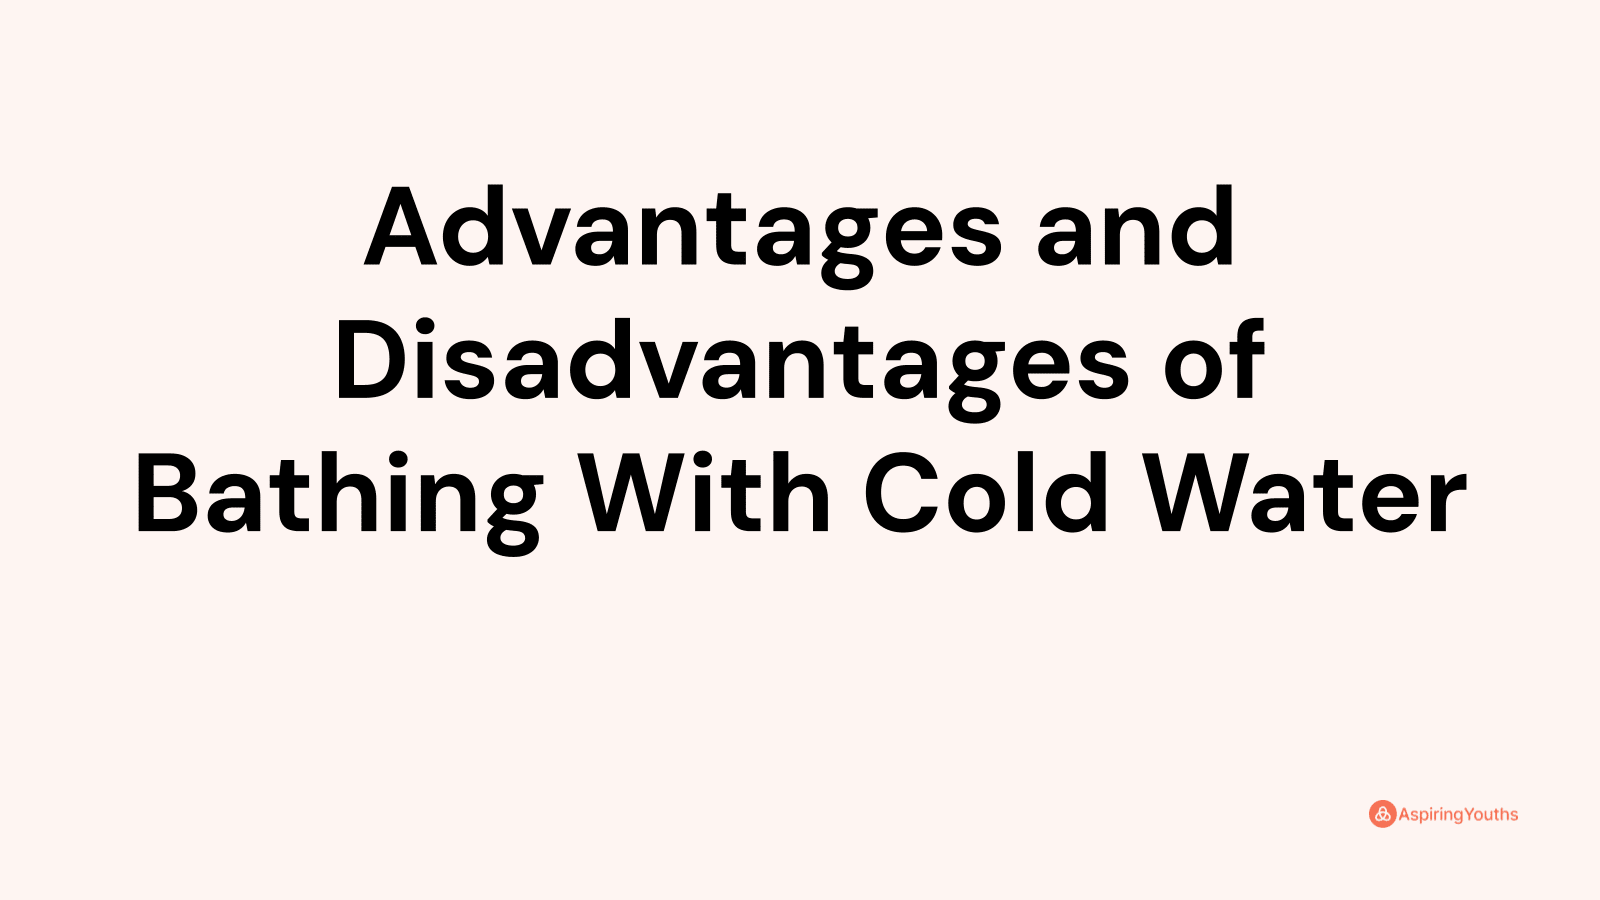 Advantages and disadvantages of Bathing With Cold Water